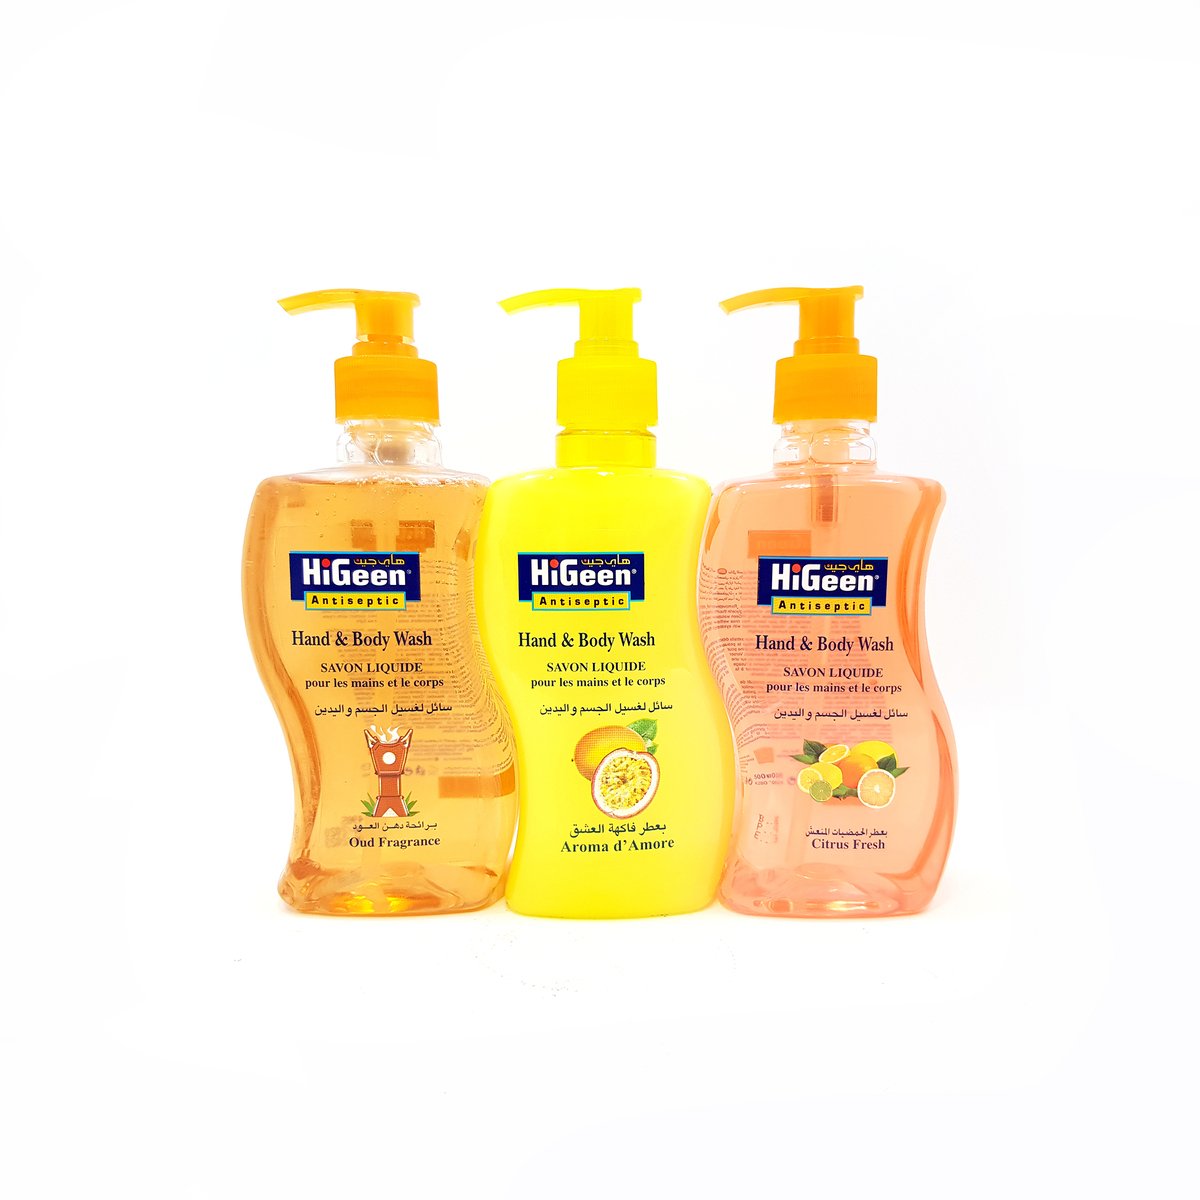 Hi-Geen Antiseptic Hand and Body Wash Assorted 3 x 500ml